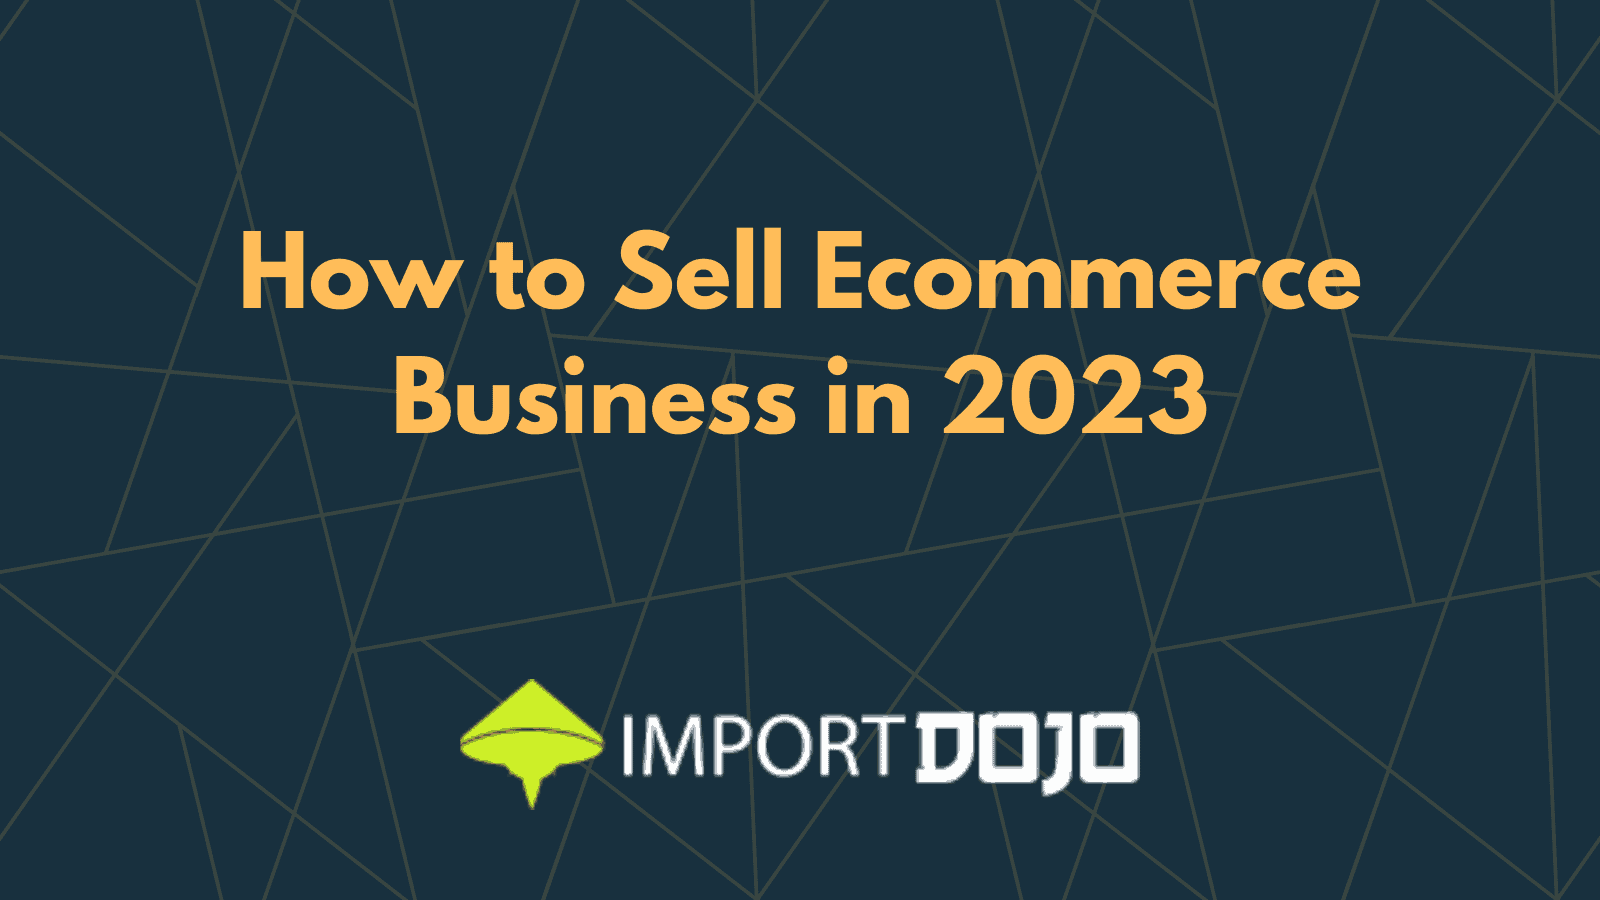 How to Sell Ecommerce Business in 2023